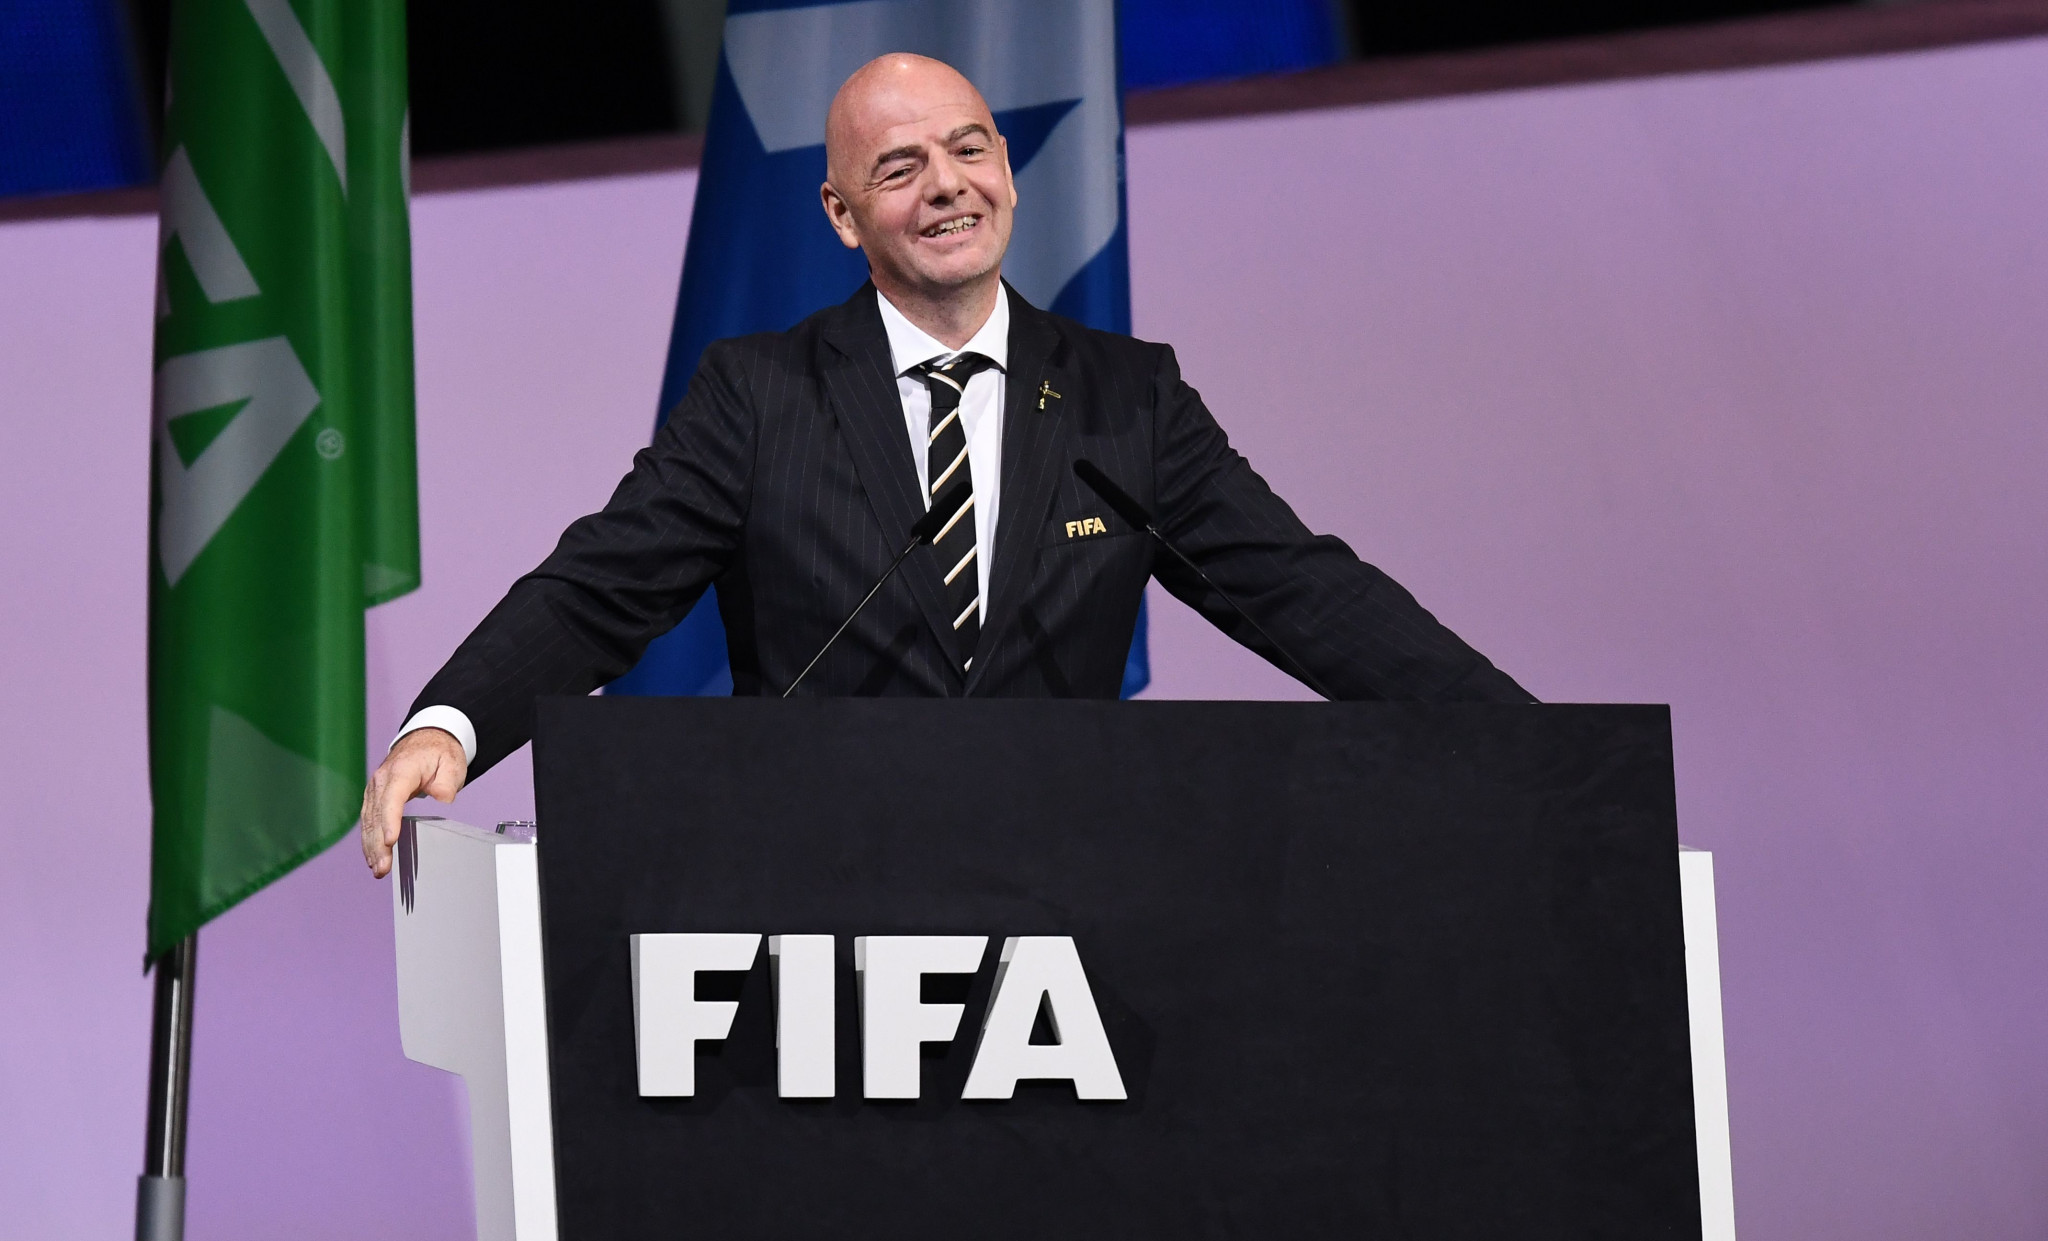 Gianni Infantino was re-elected FIFA President by acclamation last week ©Getty Images